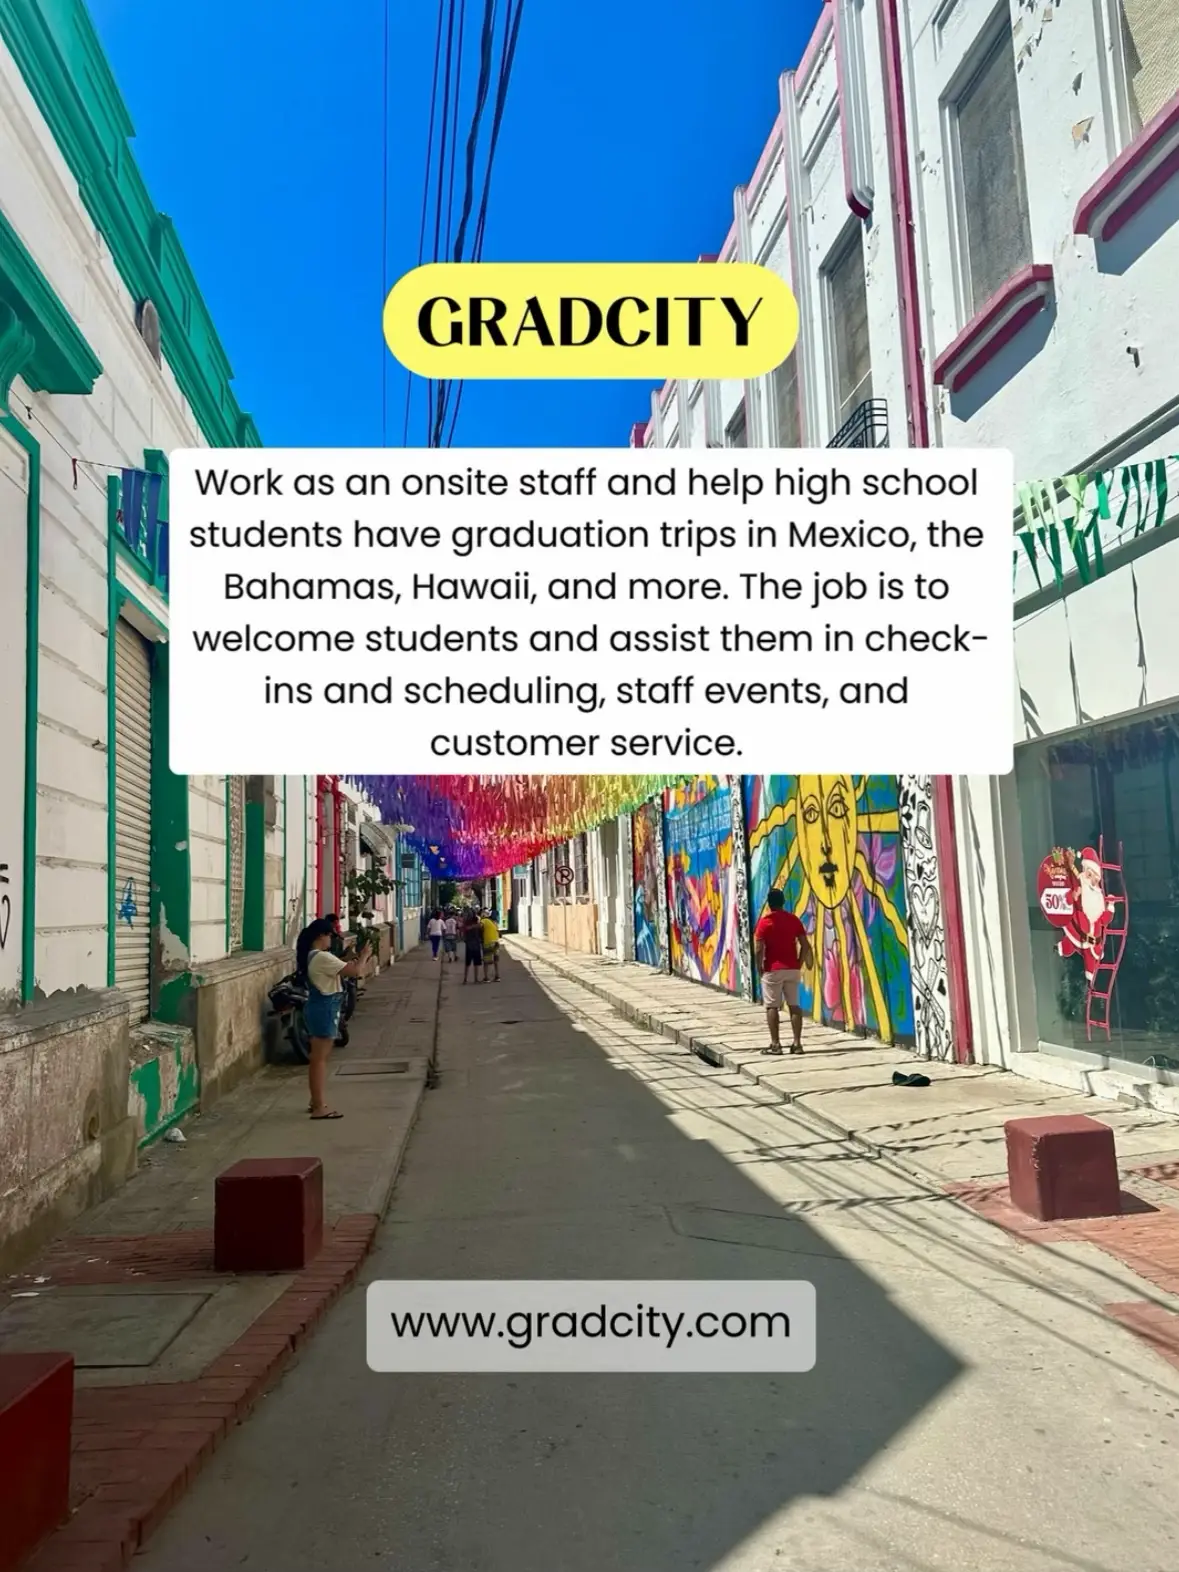  A street with a sidewalk and a building with a sign that says "work as an onsite staff and help high school students have graduation trips in Mexico, the Bahamas, Hawaii, and more. The job is to welcome students and assist them in check-ins and scheduling, staff events, and customer service."